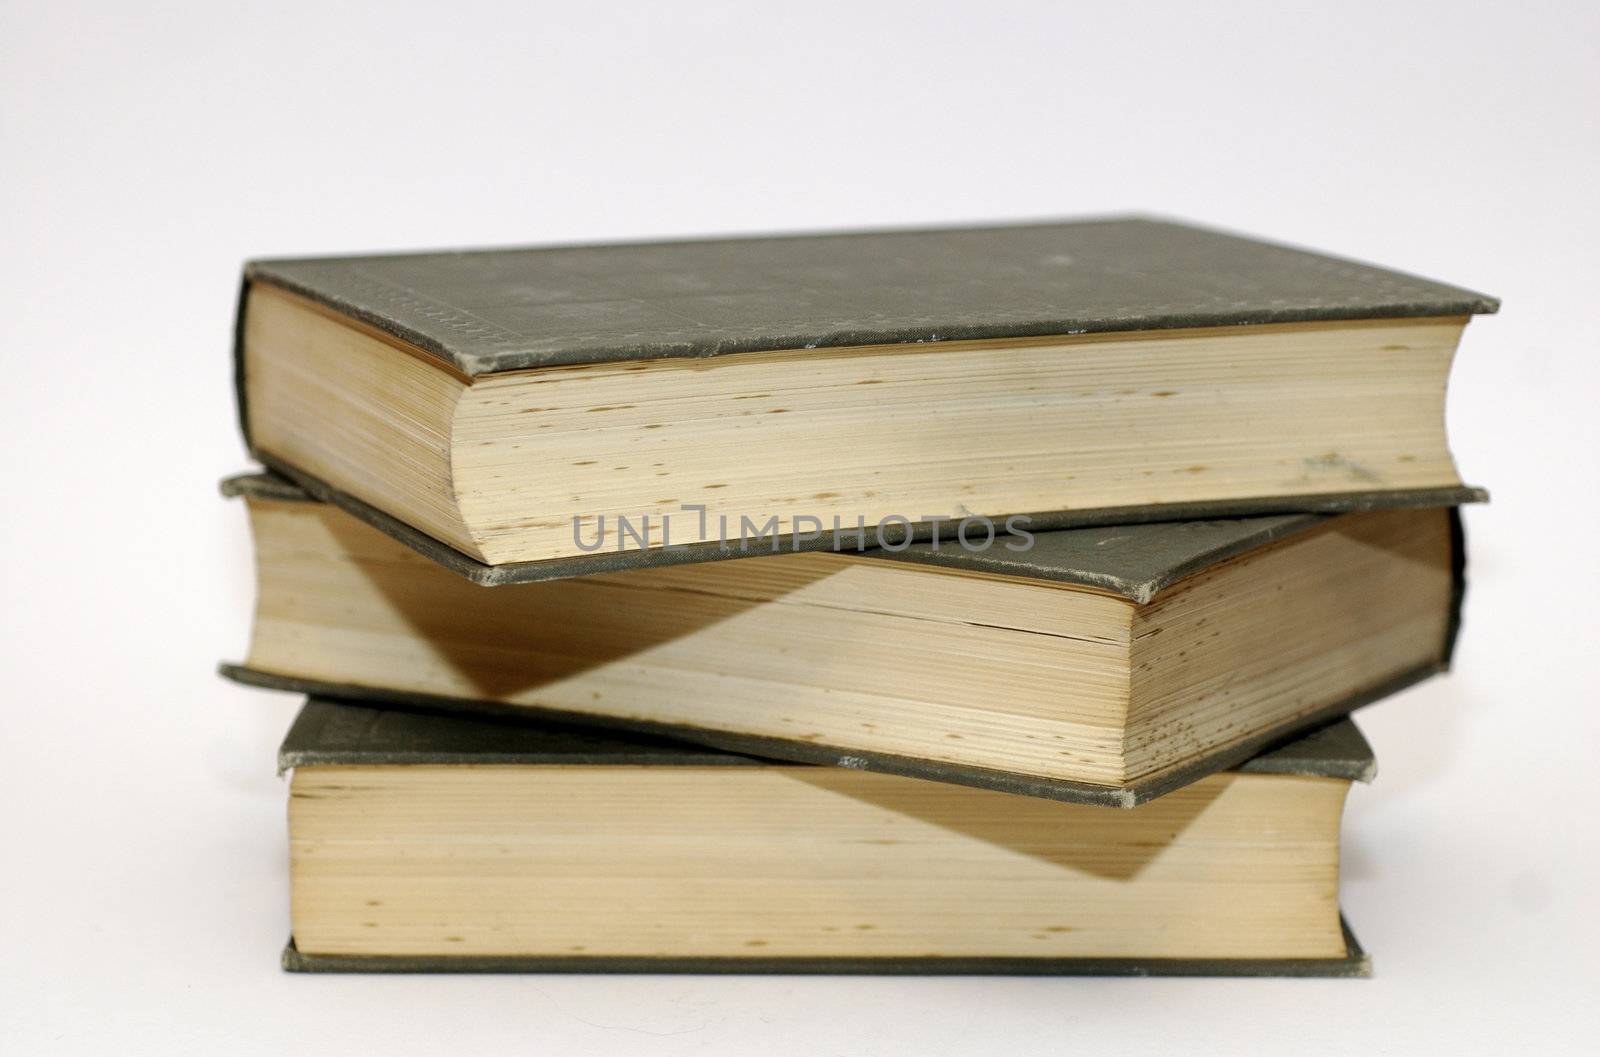 Pile of three leather bound, old fashioned, books against a white background and copy space